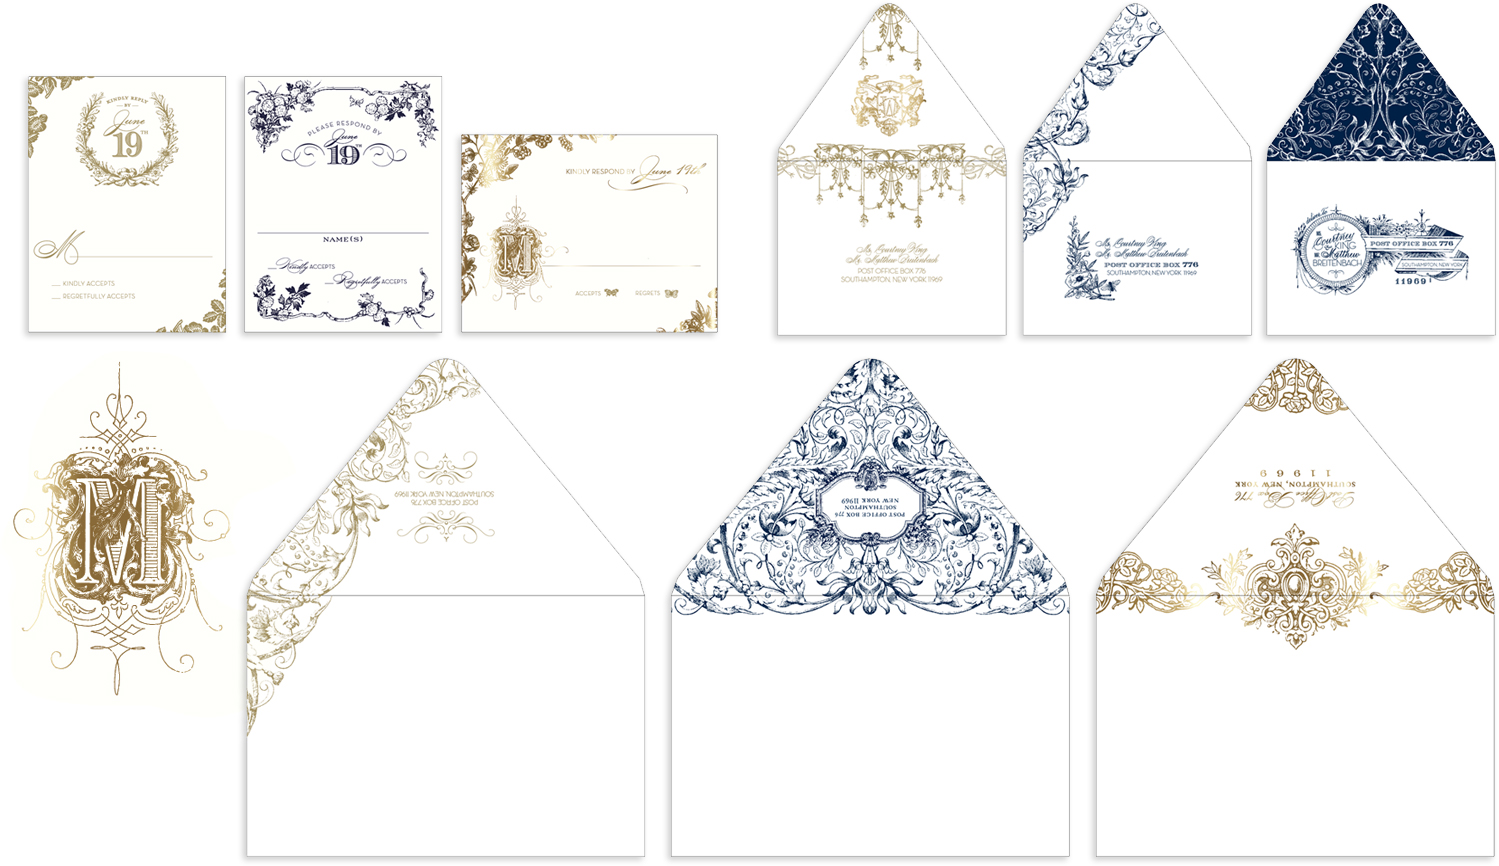 Ornate alternate designs for outer and reply envelopes